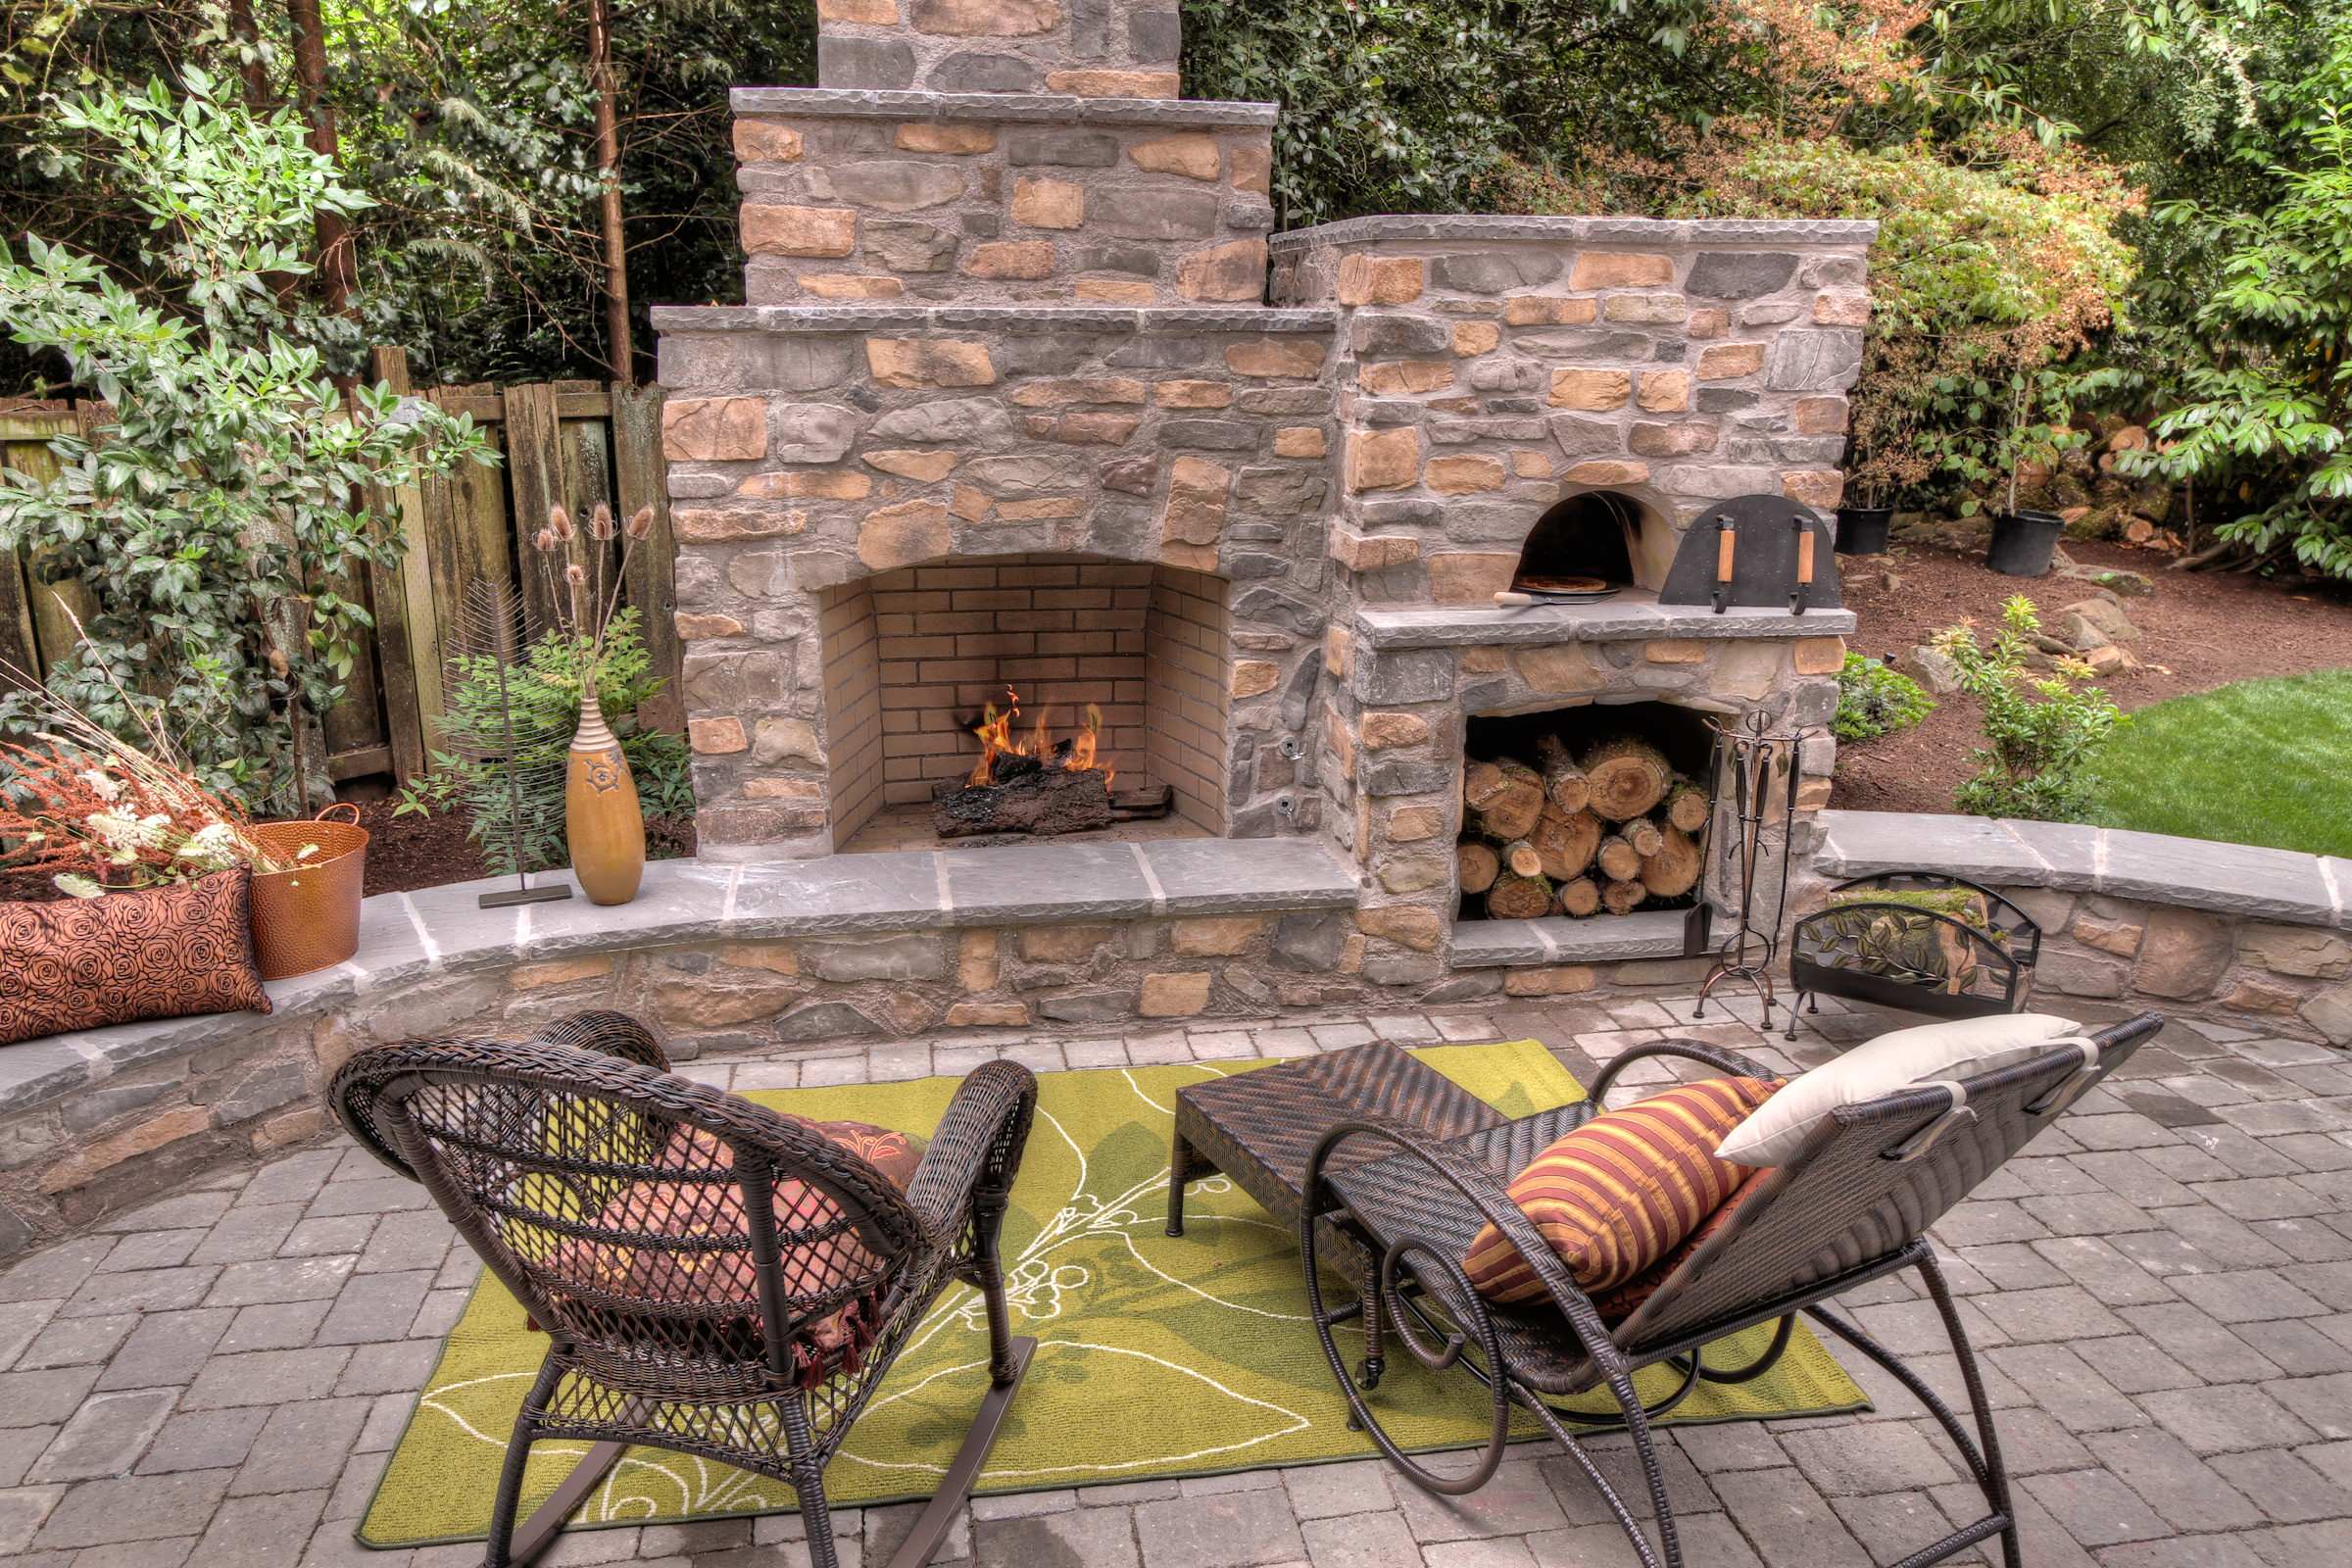 Outdoor Fireplace And Pizza Oven Houzz, Outdoor Fireplace And Pizza Oven Ideas